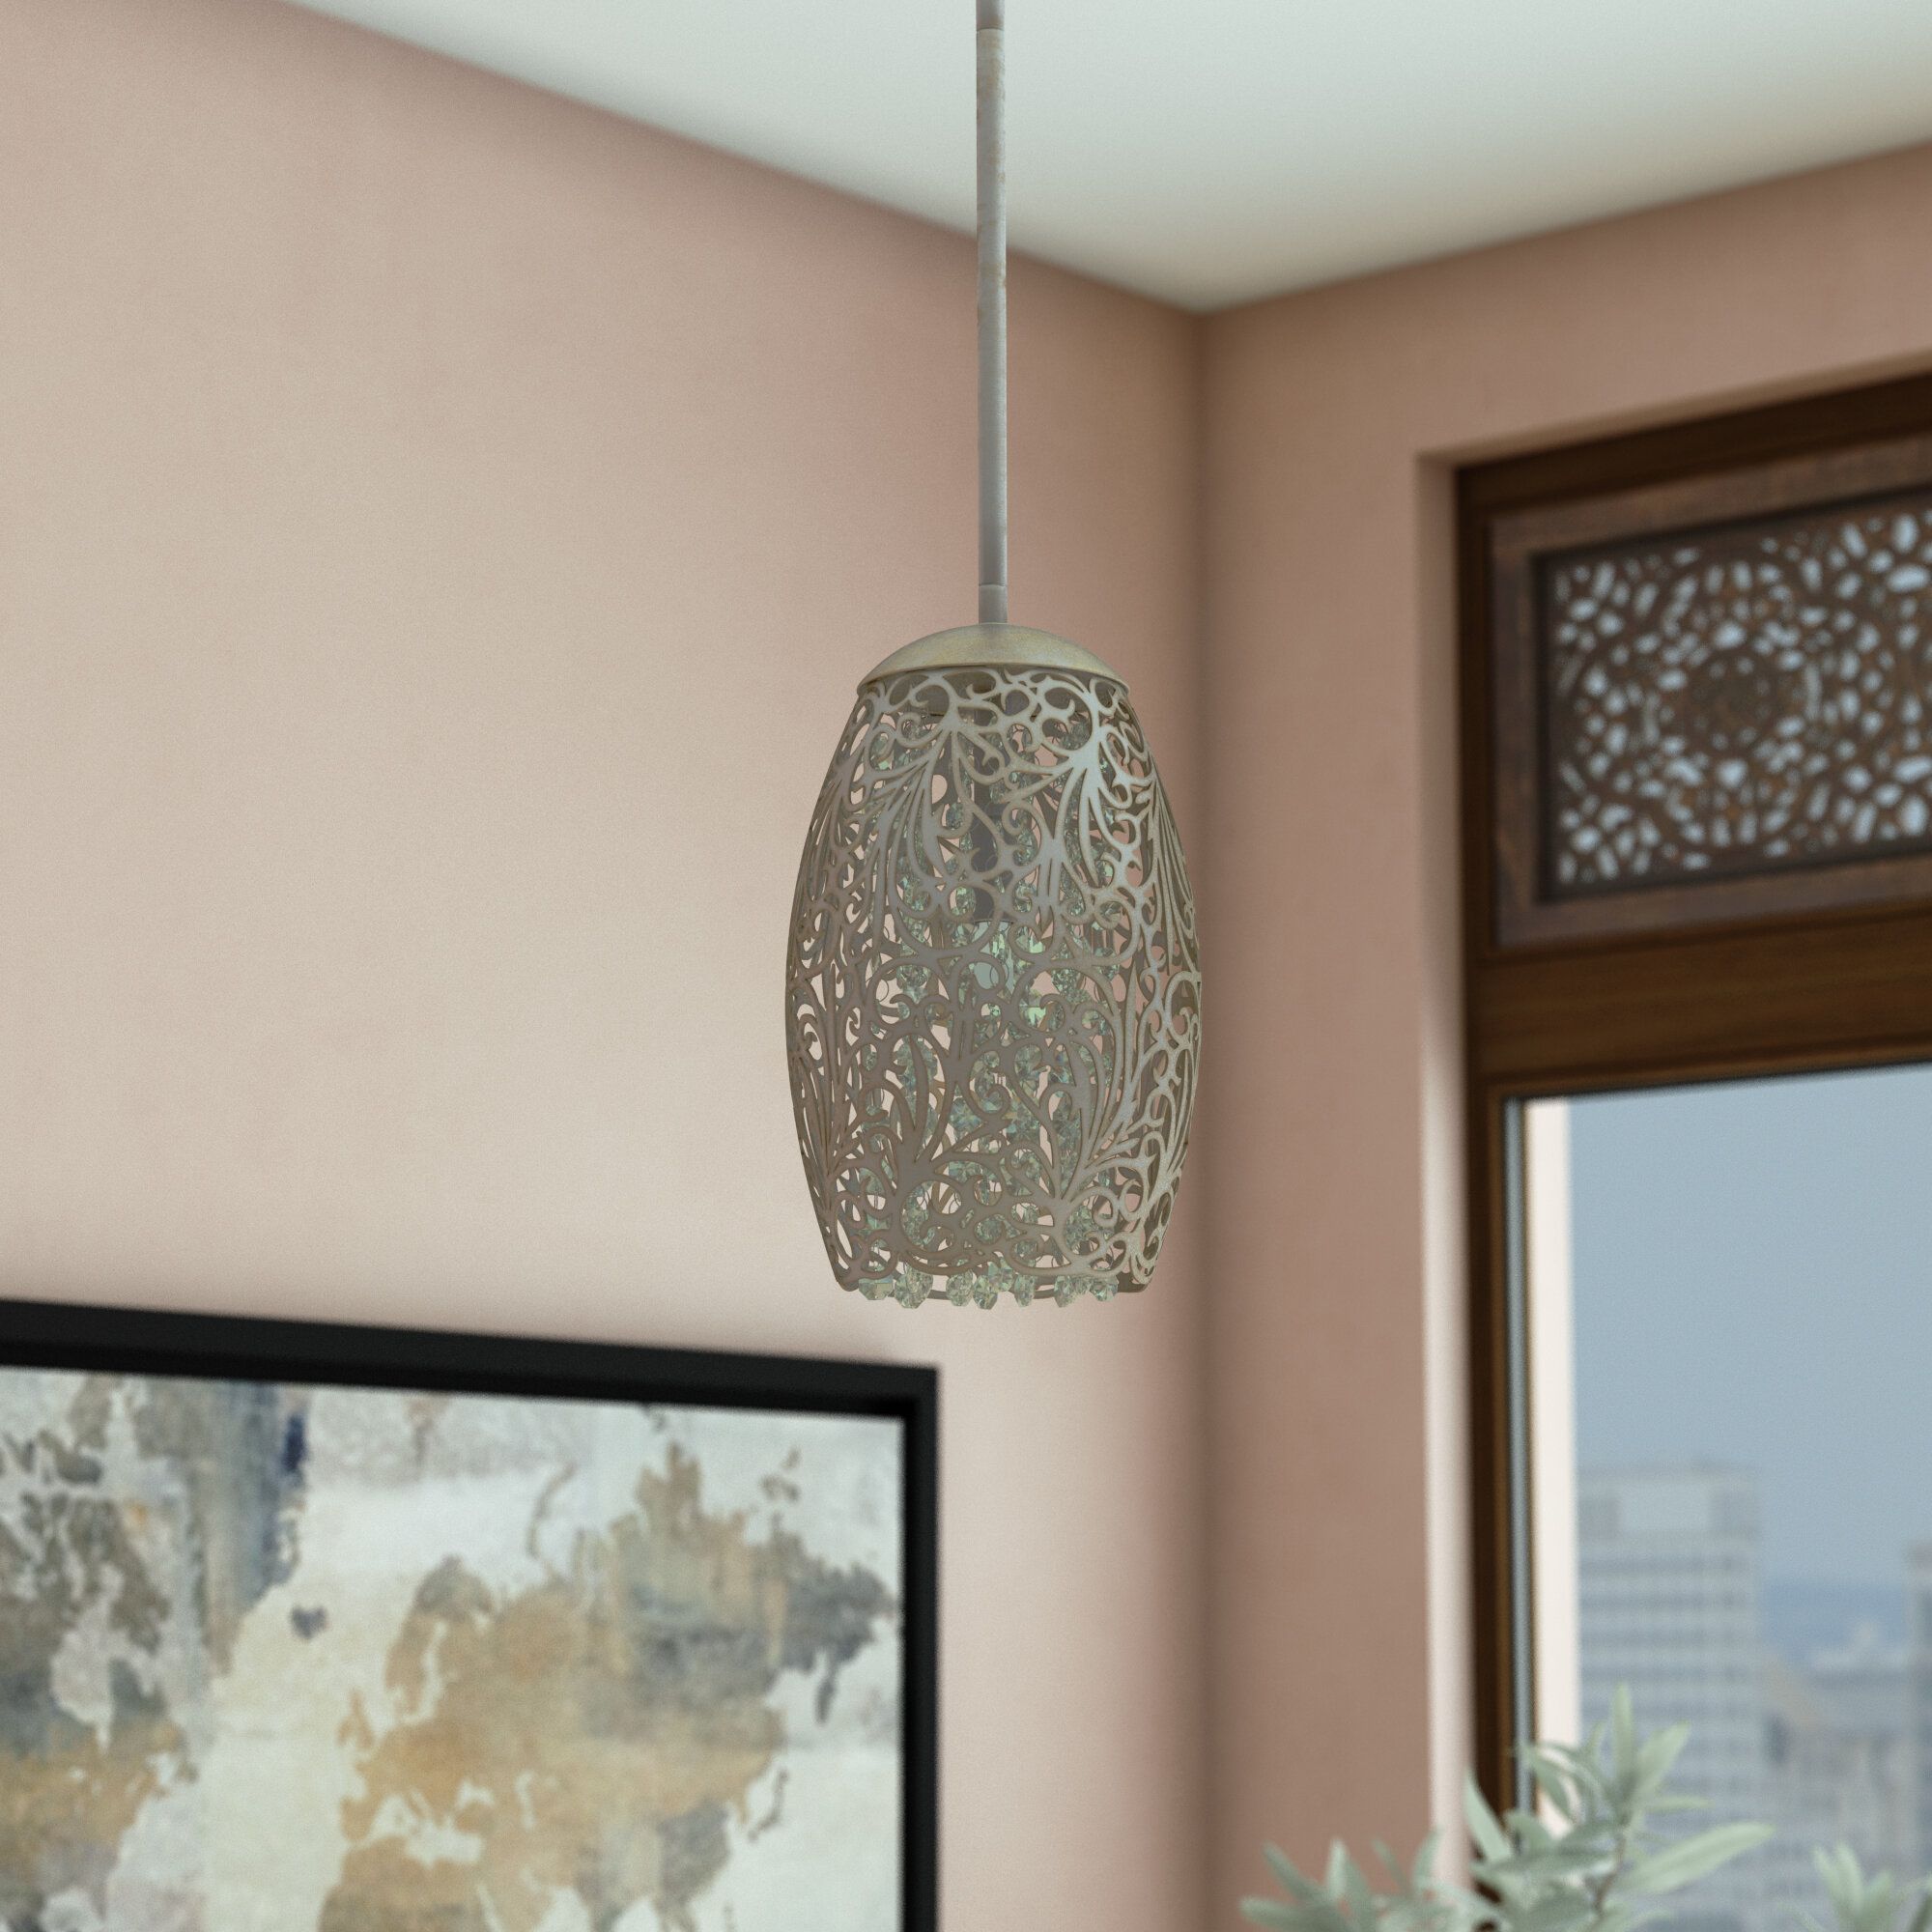 1 Light Single Pendant Lighting You'll Love In 2019 | Wayfair Within Willems 1 Light Single Drum Pendants (View 6 of 30)